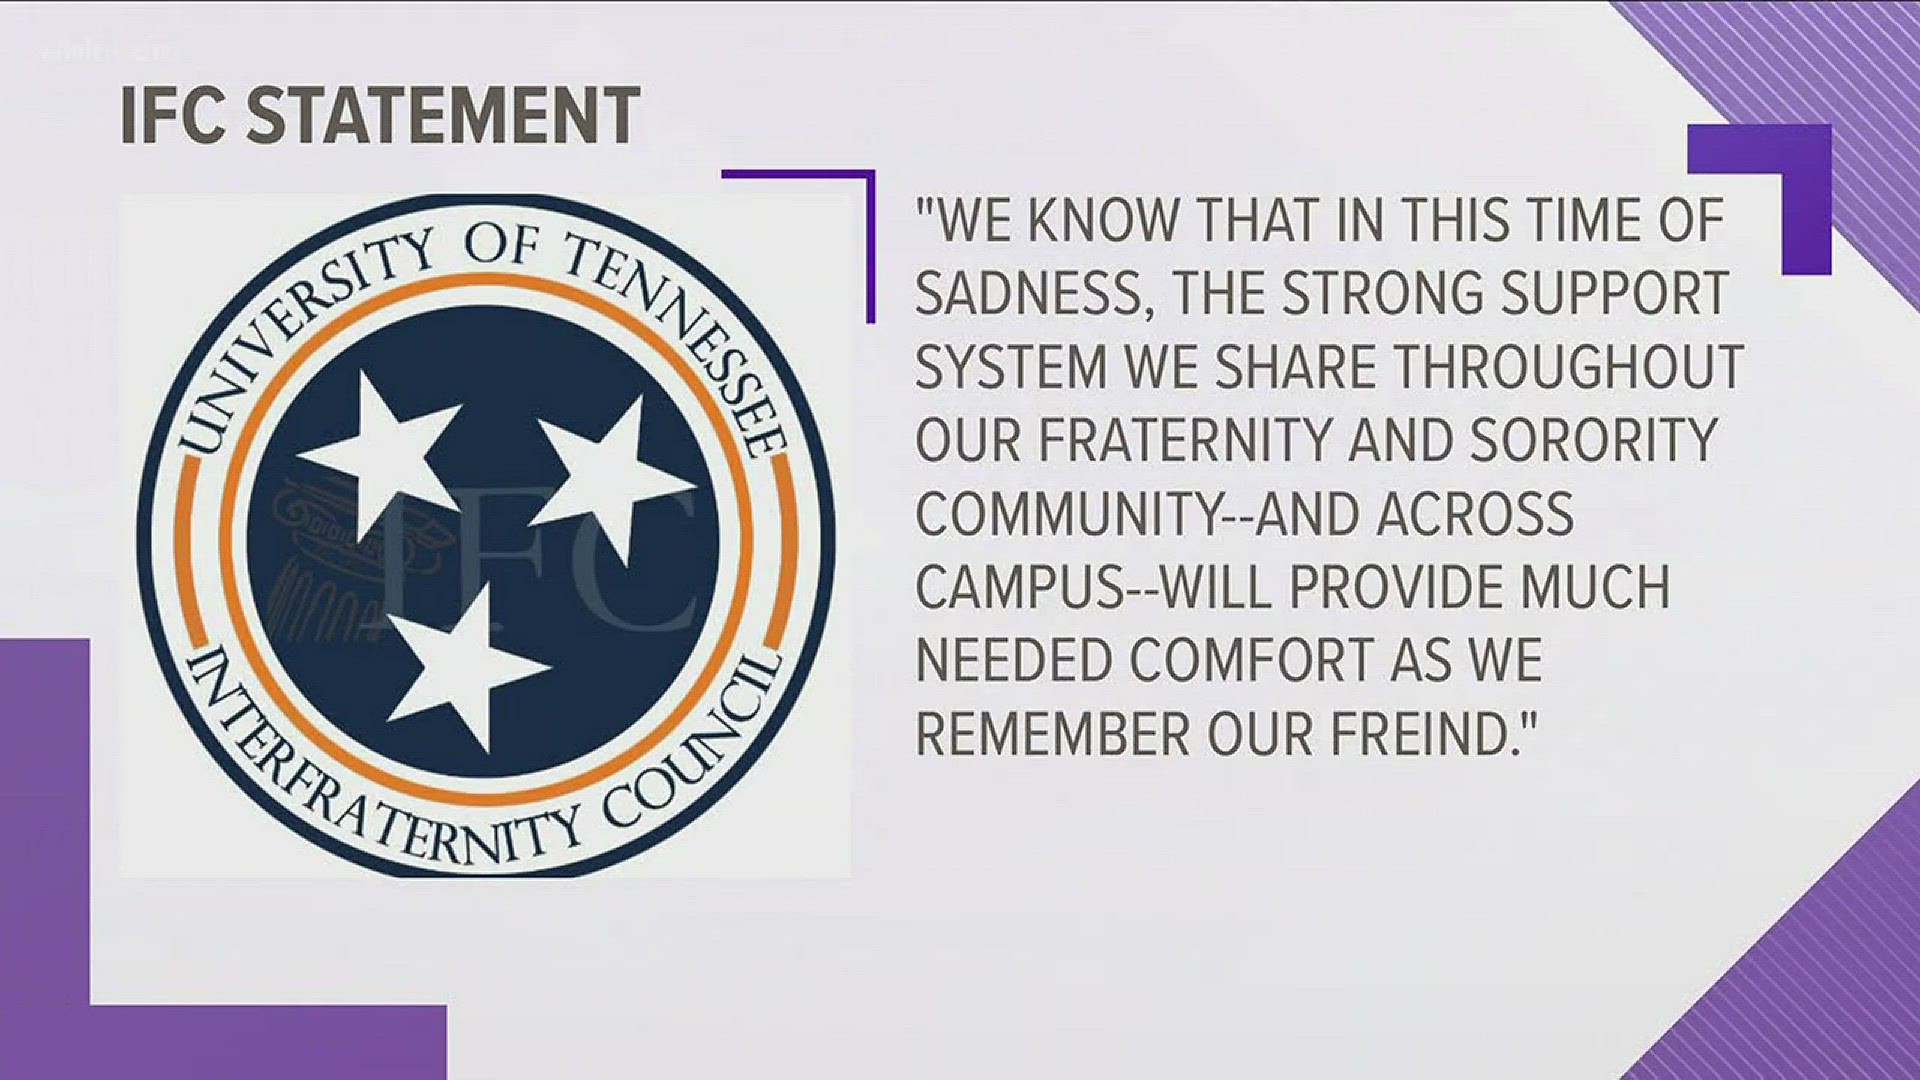 Interfraternity Council at the University of Tennessee release a statement on Saturday saying they will provide 'much needed comfort as we remember our friend.'